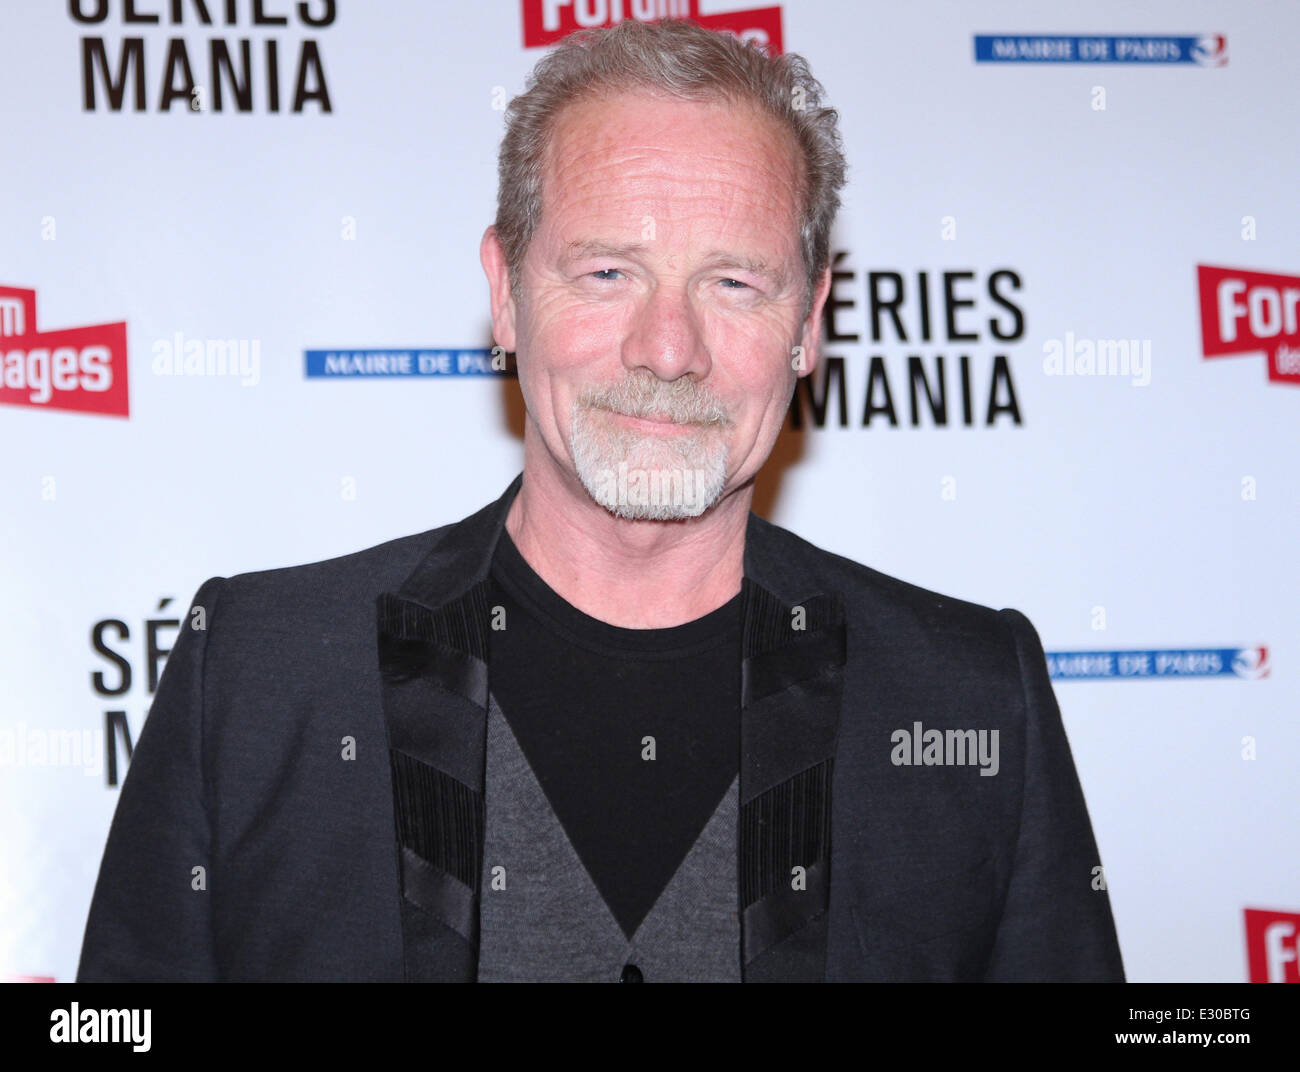 Scottish actor and director Peter Mullan attends the festival Serie Mania to present Fear at the Forum Images at the Chatelet  Featuring: Peter Mullen Where: Paris, France When: 21 May 2013   **Not available for publication in France, Netherlands, Belgium, Spain and Italy. Available for the rest of the world.** Stock Photo